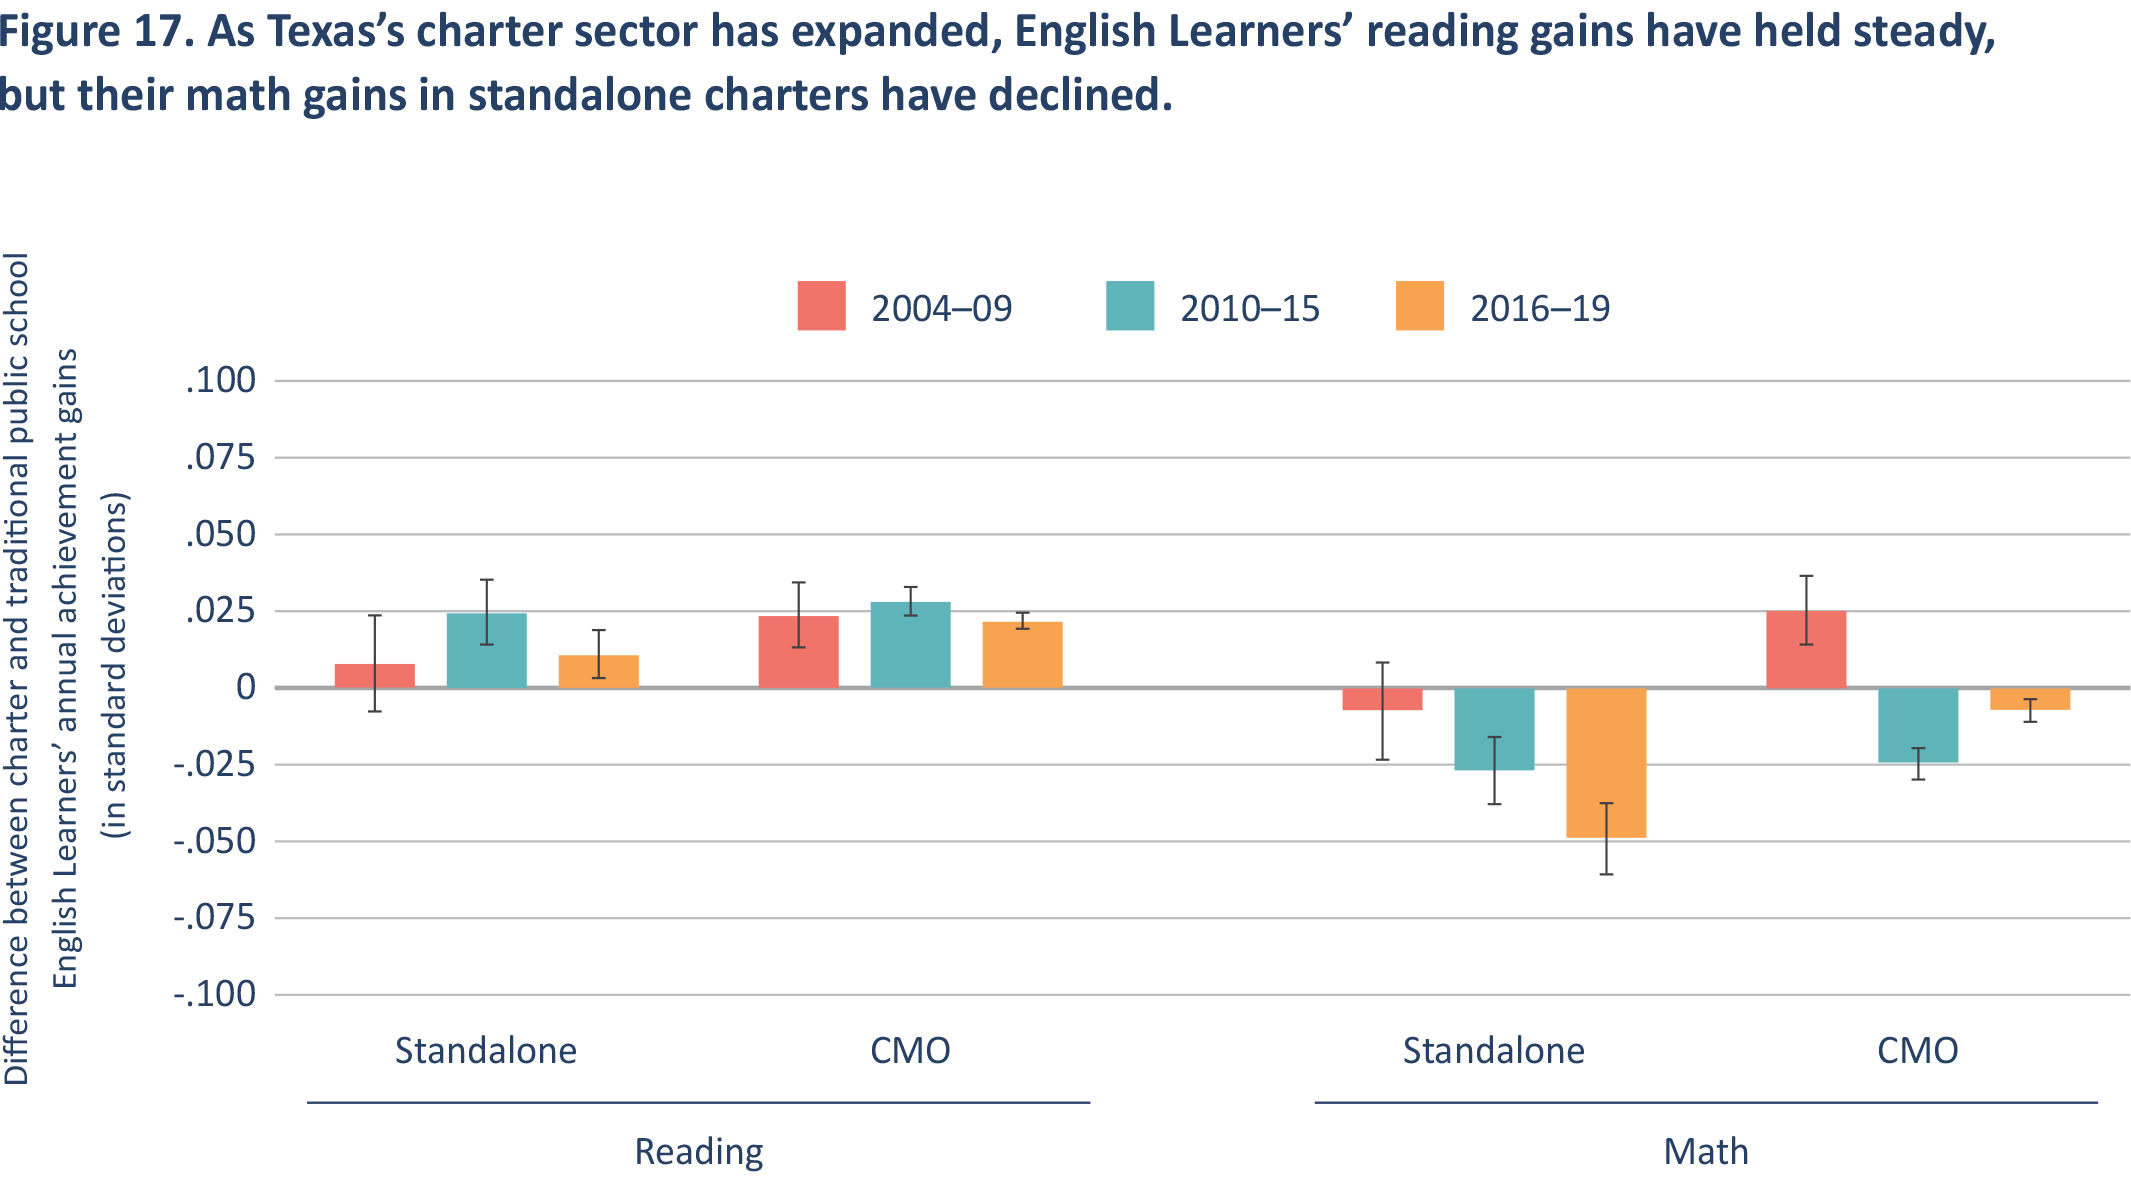 Figure 17. As Texas's charter sector has expanded, English Learners' reading gains have held steady, but their math gains in standalone charters have declined.